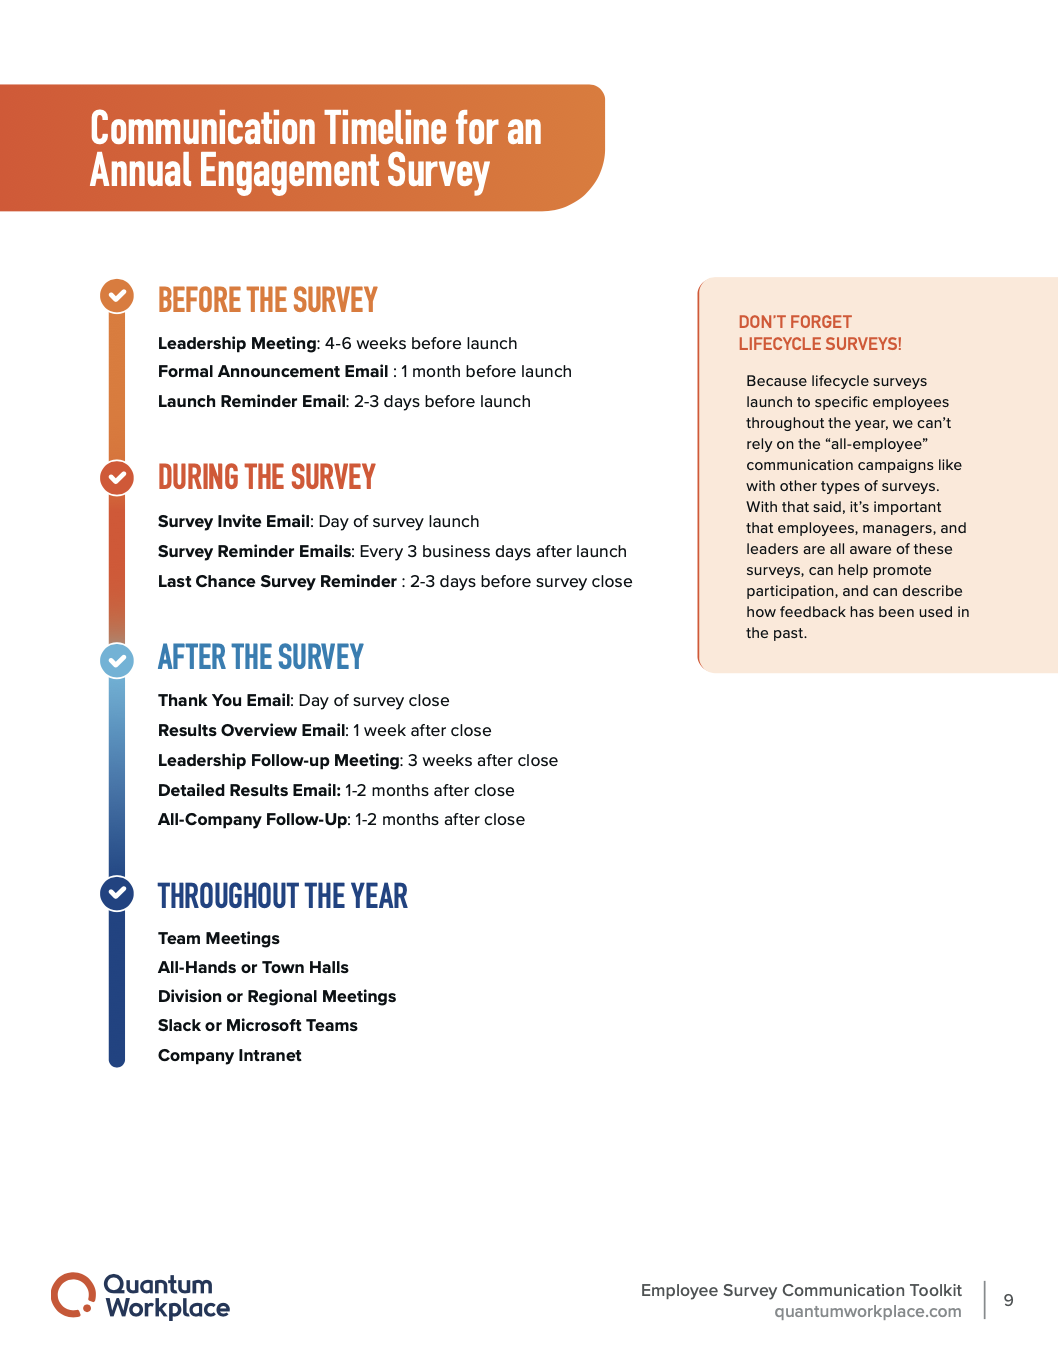 eBook preview: communication timeline for an engagement survey